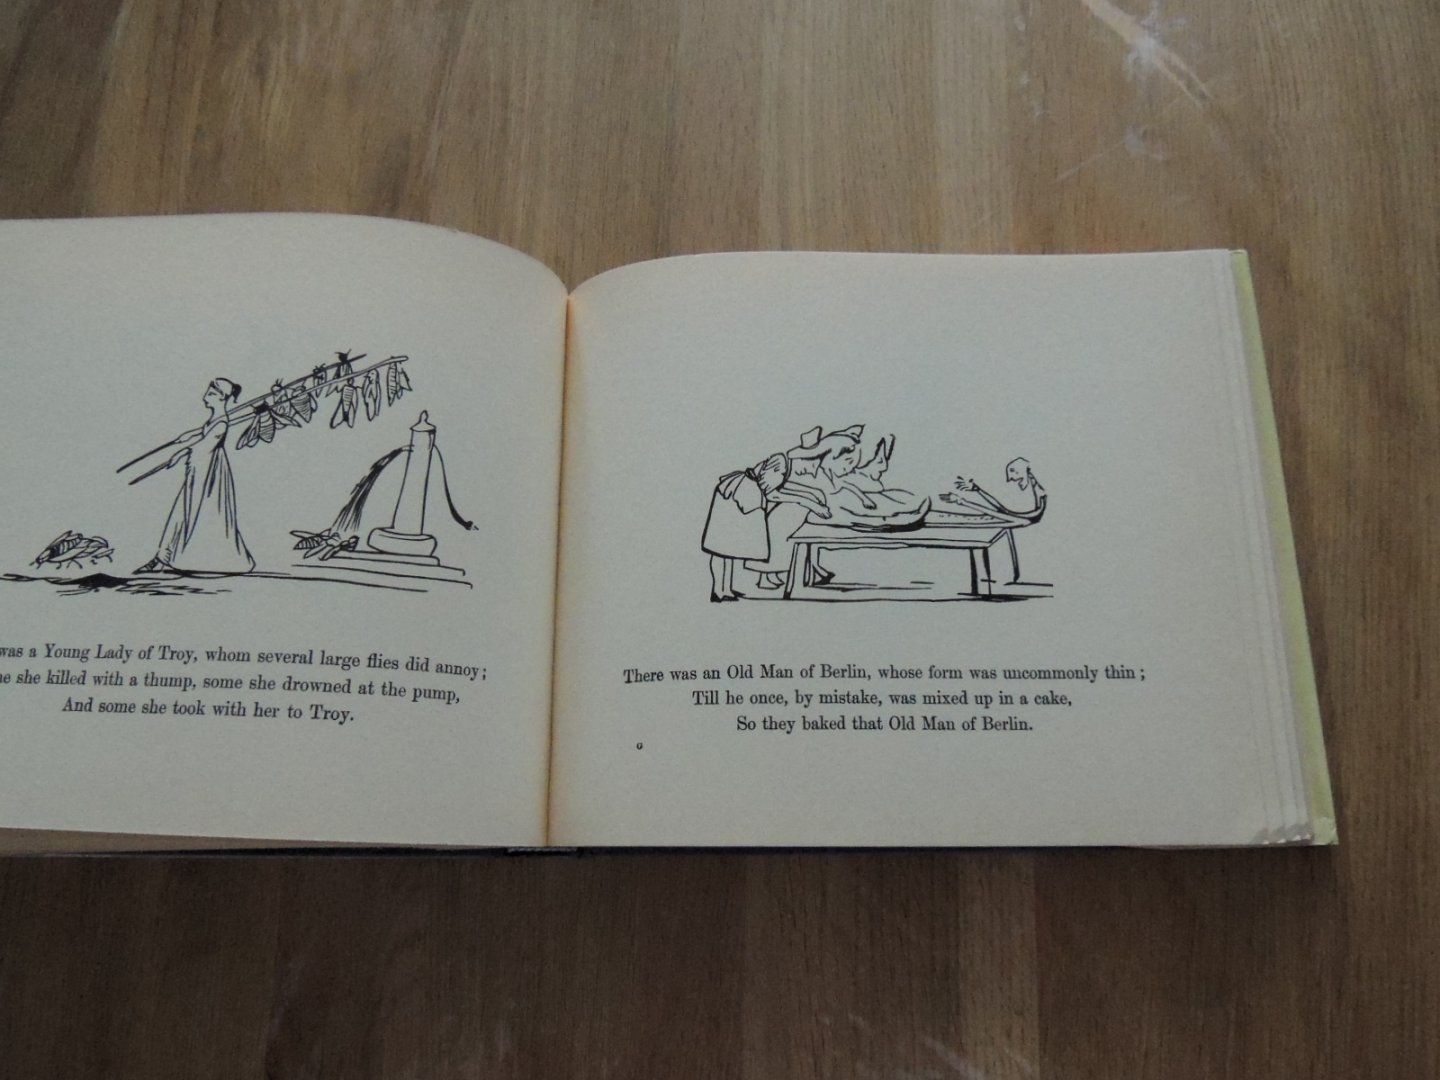 Lear, Edward - Edward lear's book of nonsense and more nonsense - With all the verses and all original drawings by the author